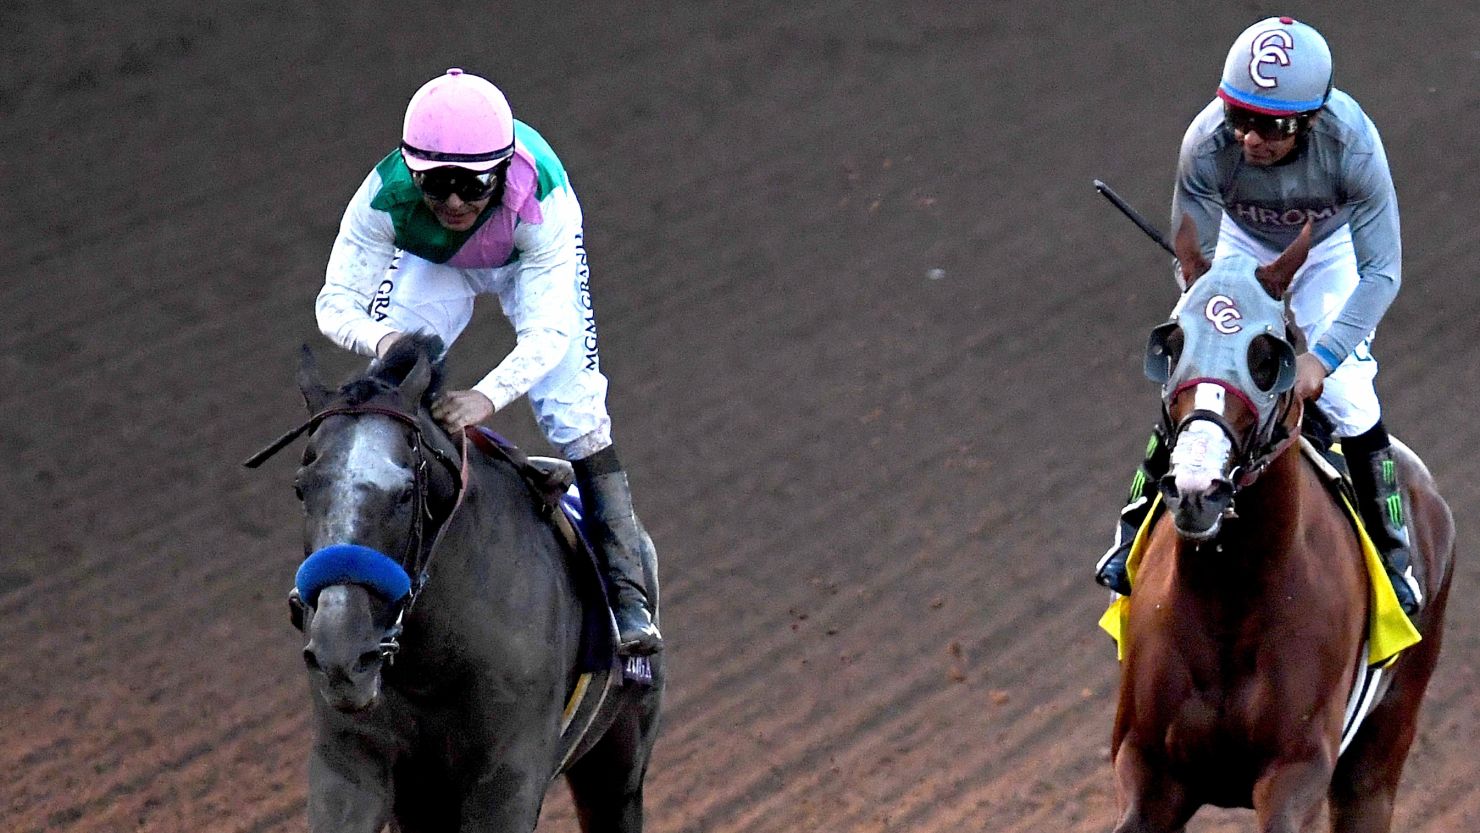 Arrogate (left) got up to beat  California Chrome at the post in the $6 million Breeders' Cup Classic at Santa Anita Park.